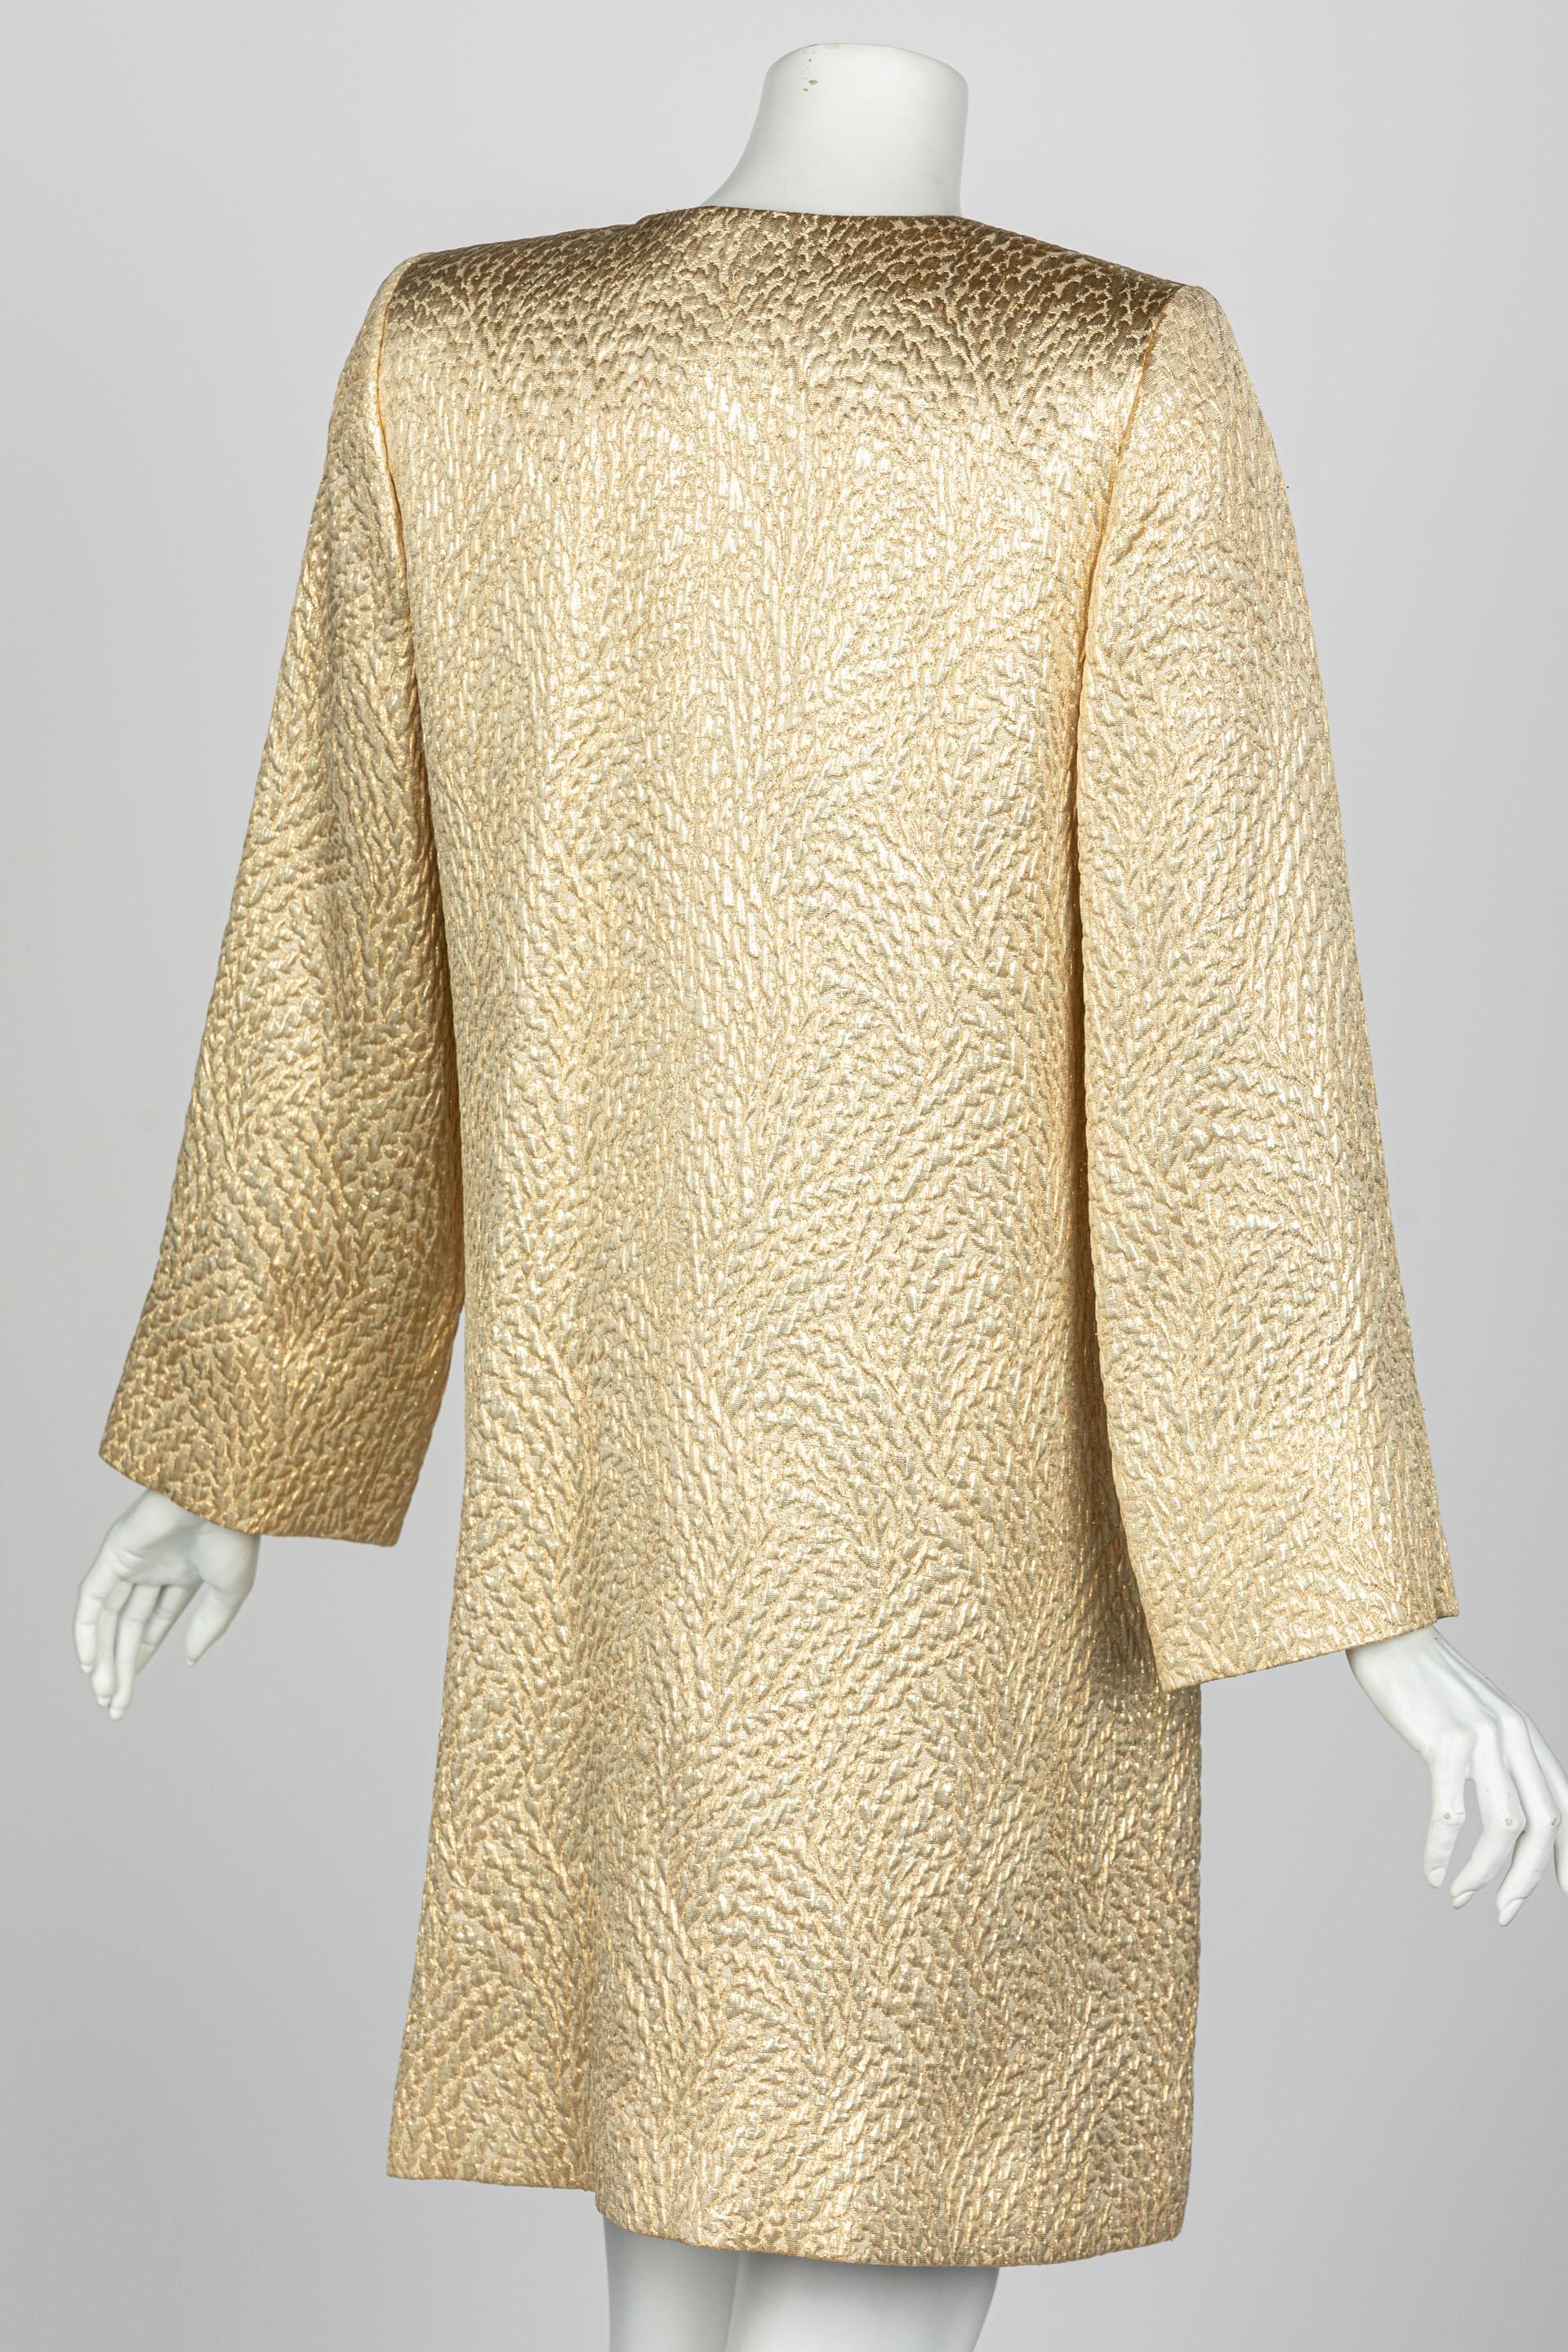 Women's Yves Saint Laurent Gold Evening Coat w/ Jeweled Buttons YSL, 1990s For Sale